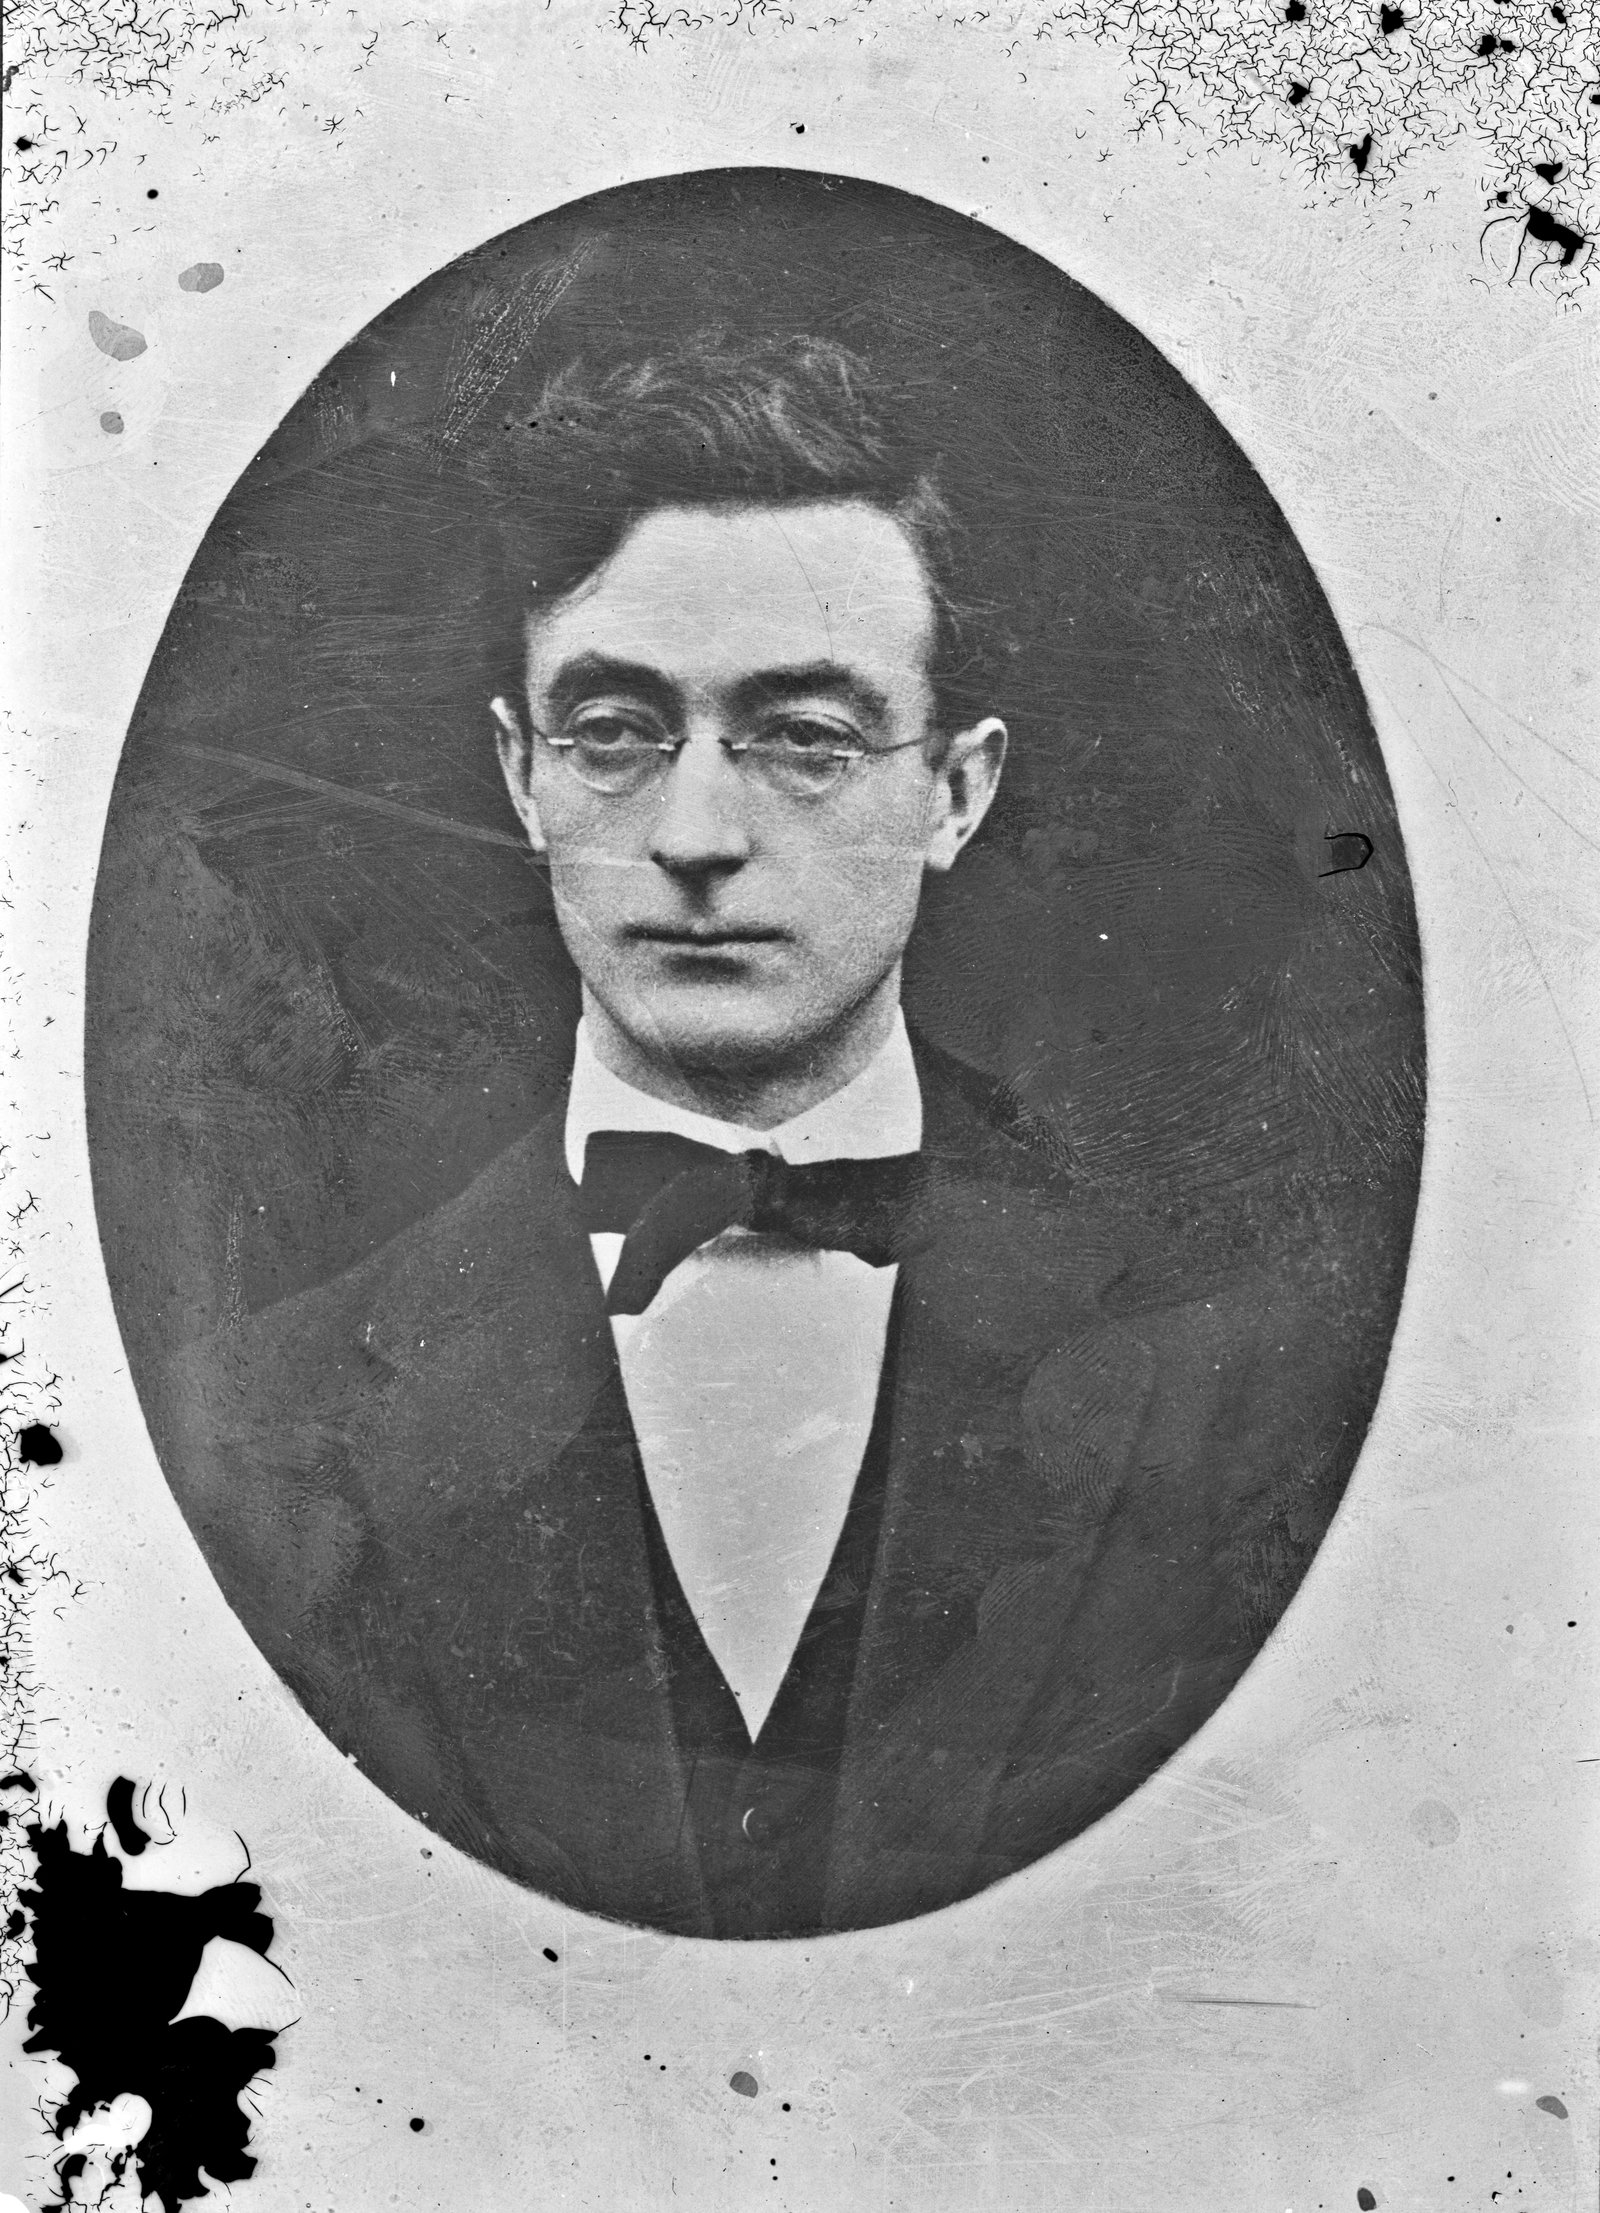 Image - Seán McGarry, whose son Emmet was killed in an arson attack on their Fairview home. Image courtesy of the National Library of Ireland